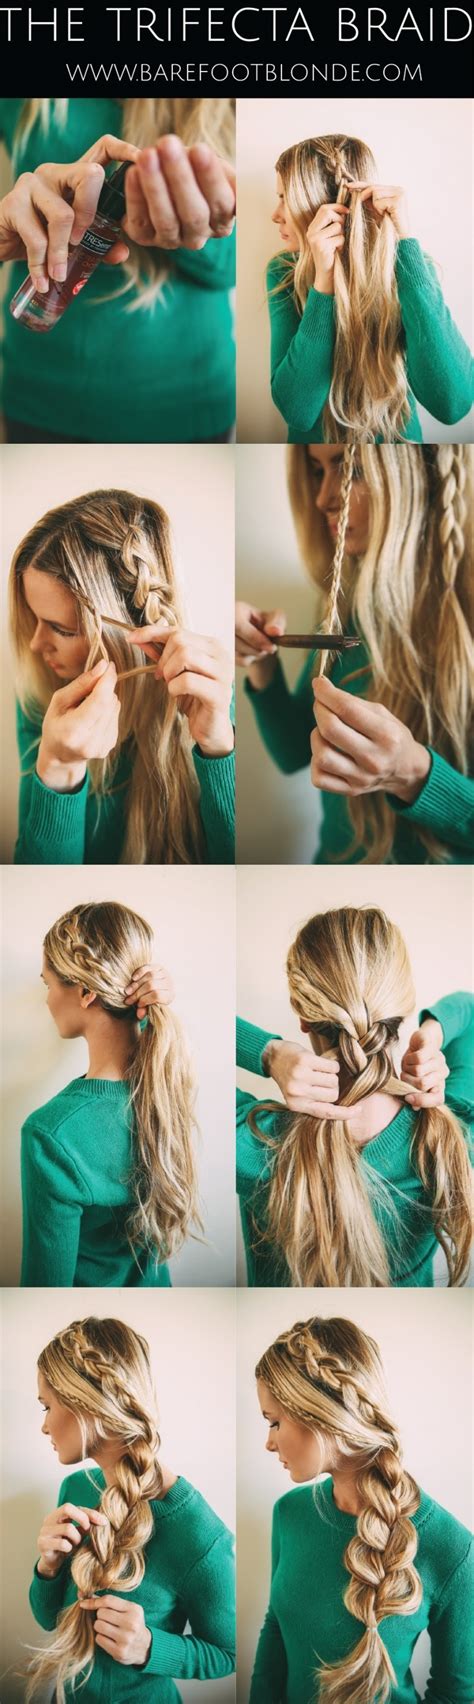 20 Easy Hairstyle Tutorials For Your Everyday Look Pretty Designs